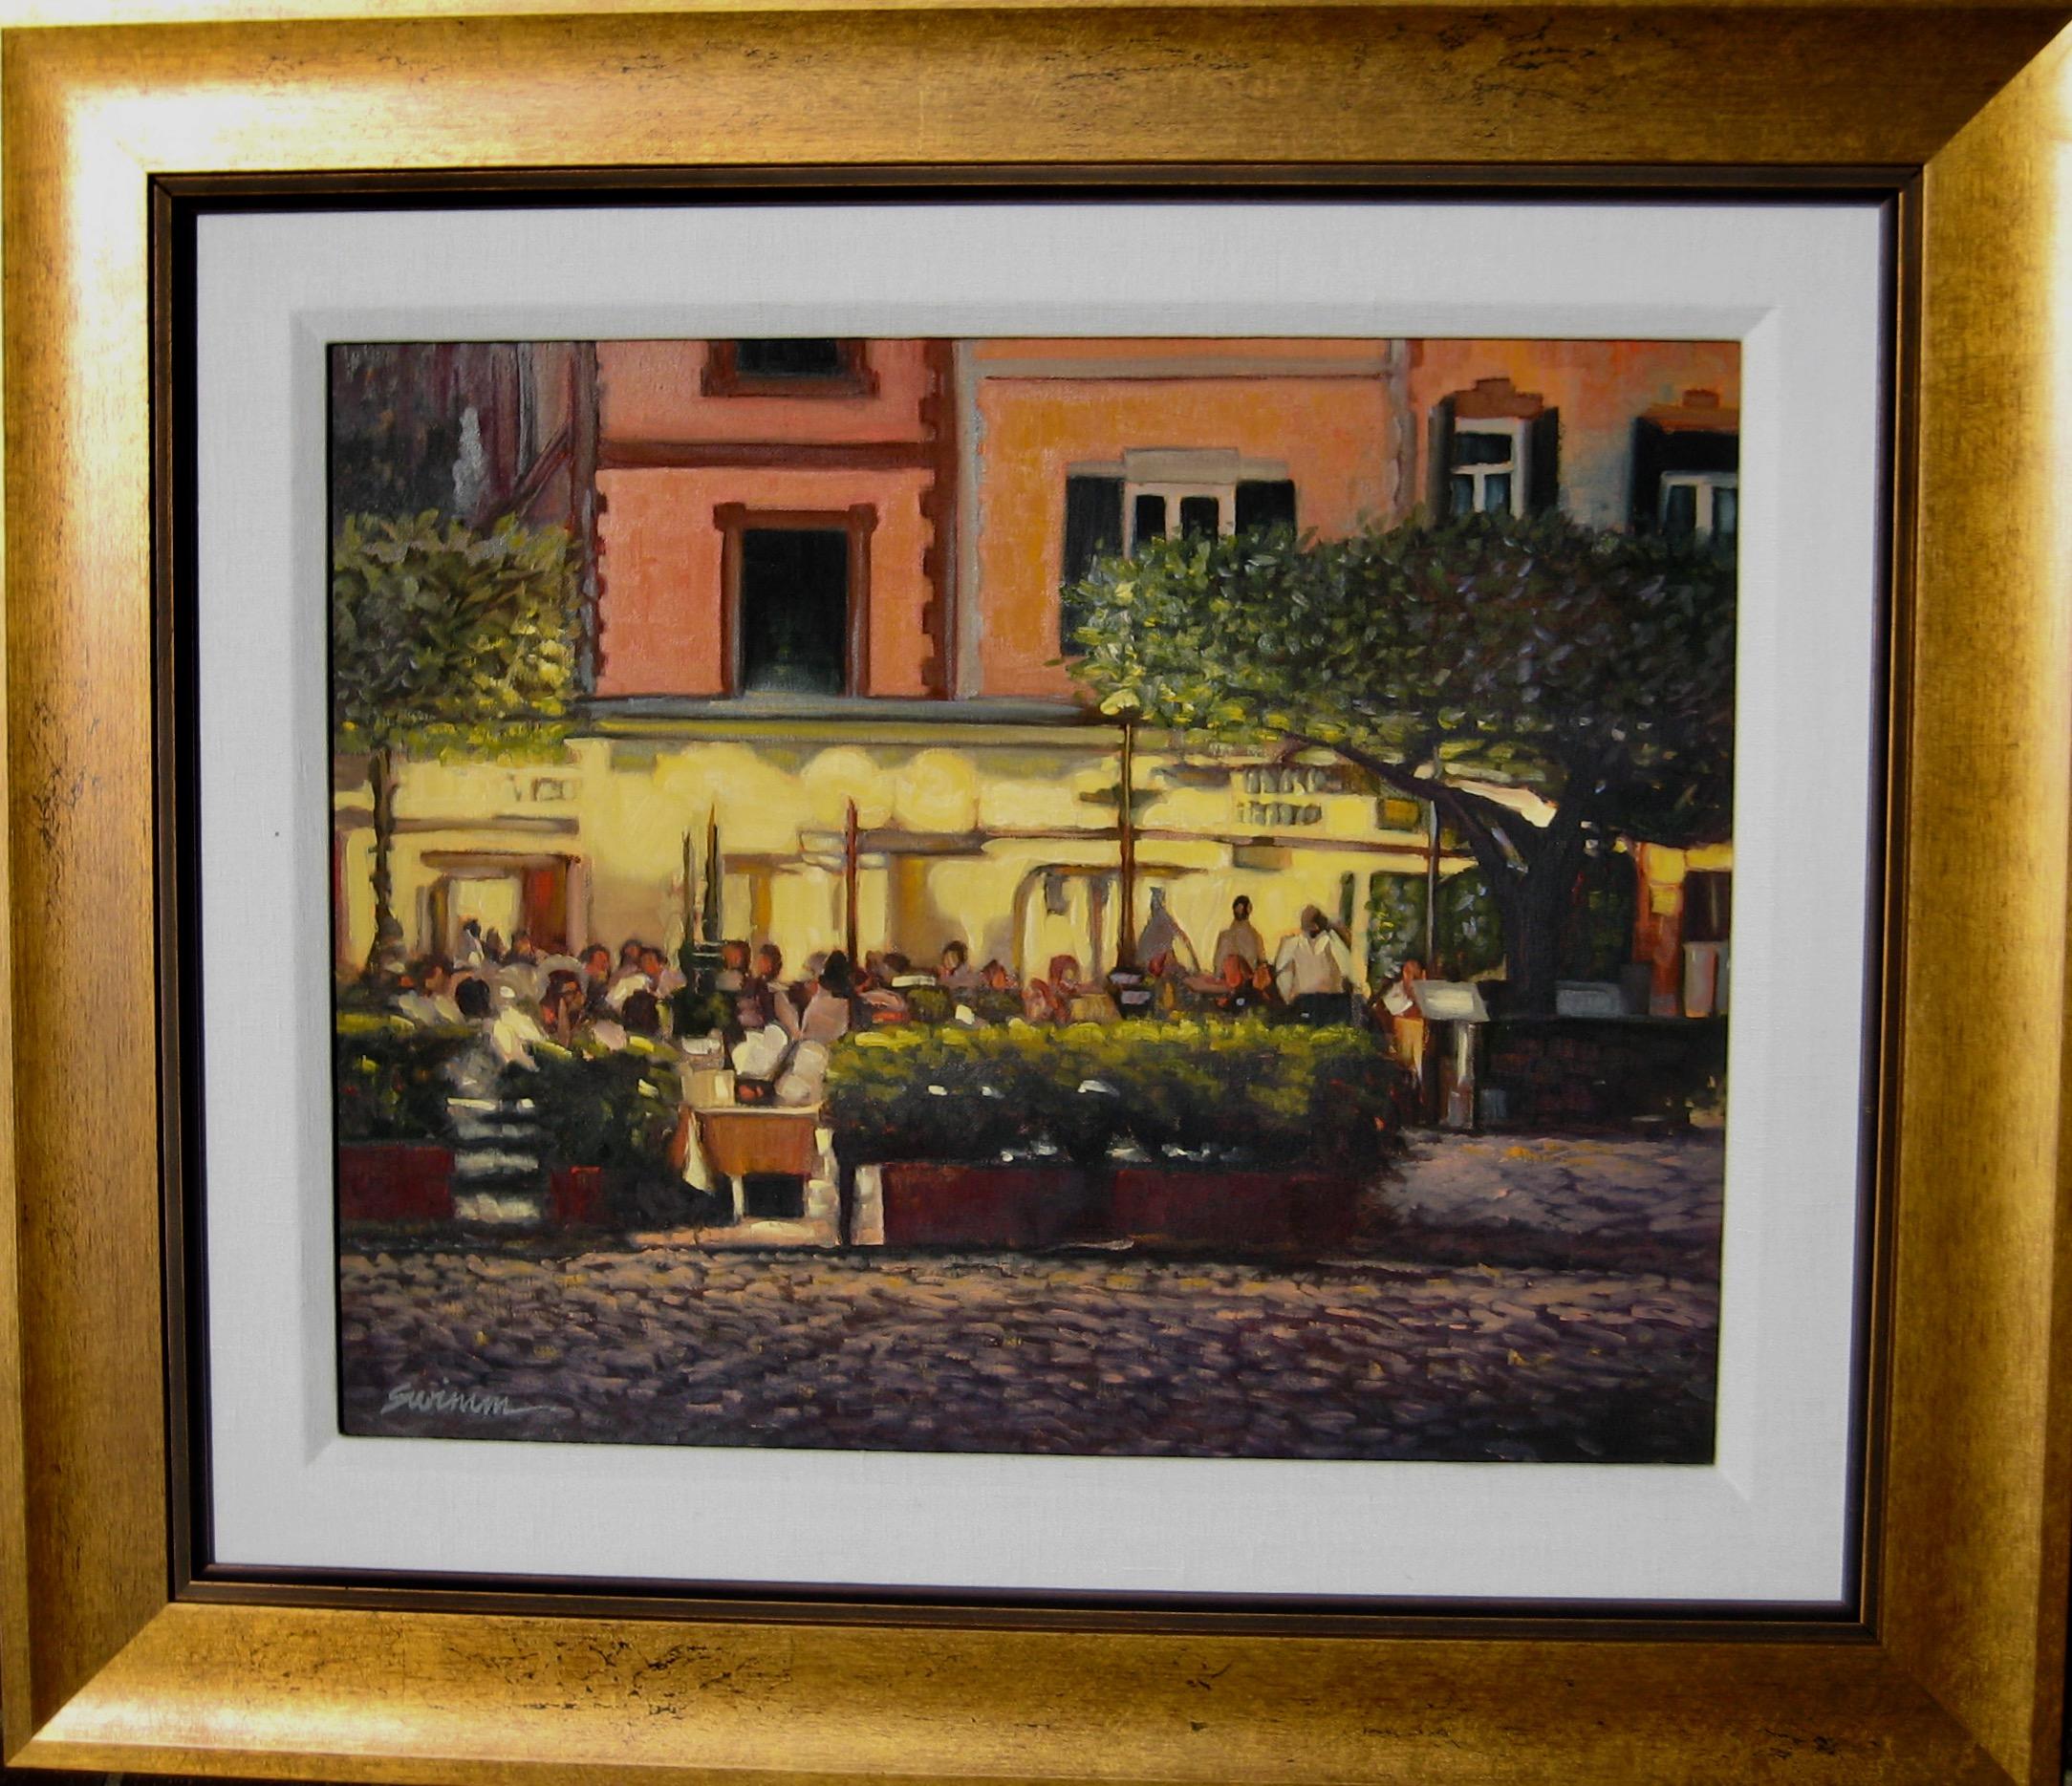   Glowing lights and warm purple, lavenders and golds of the rippling water highlight this inviting Italian night scene. 